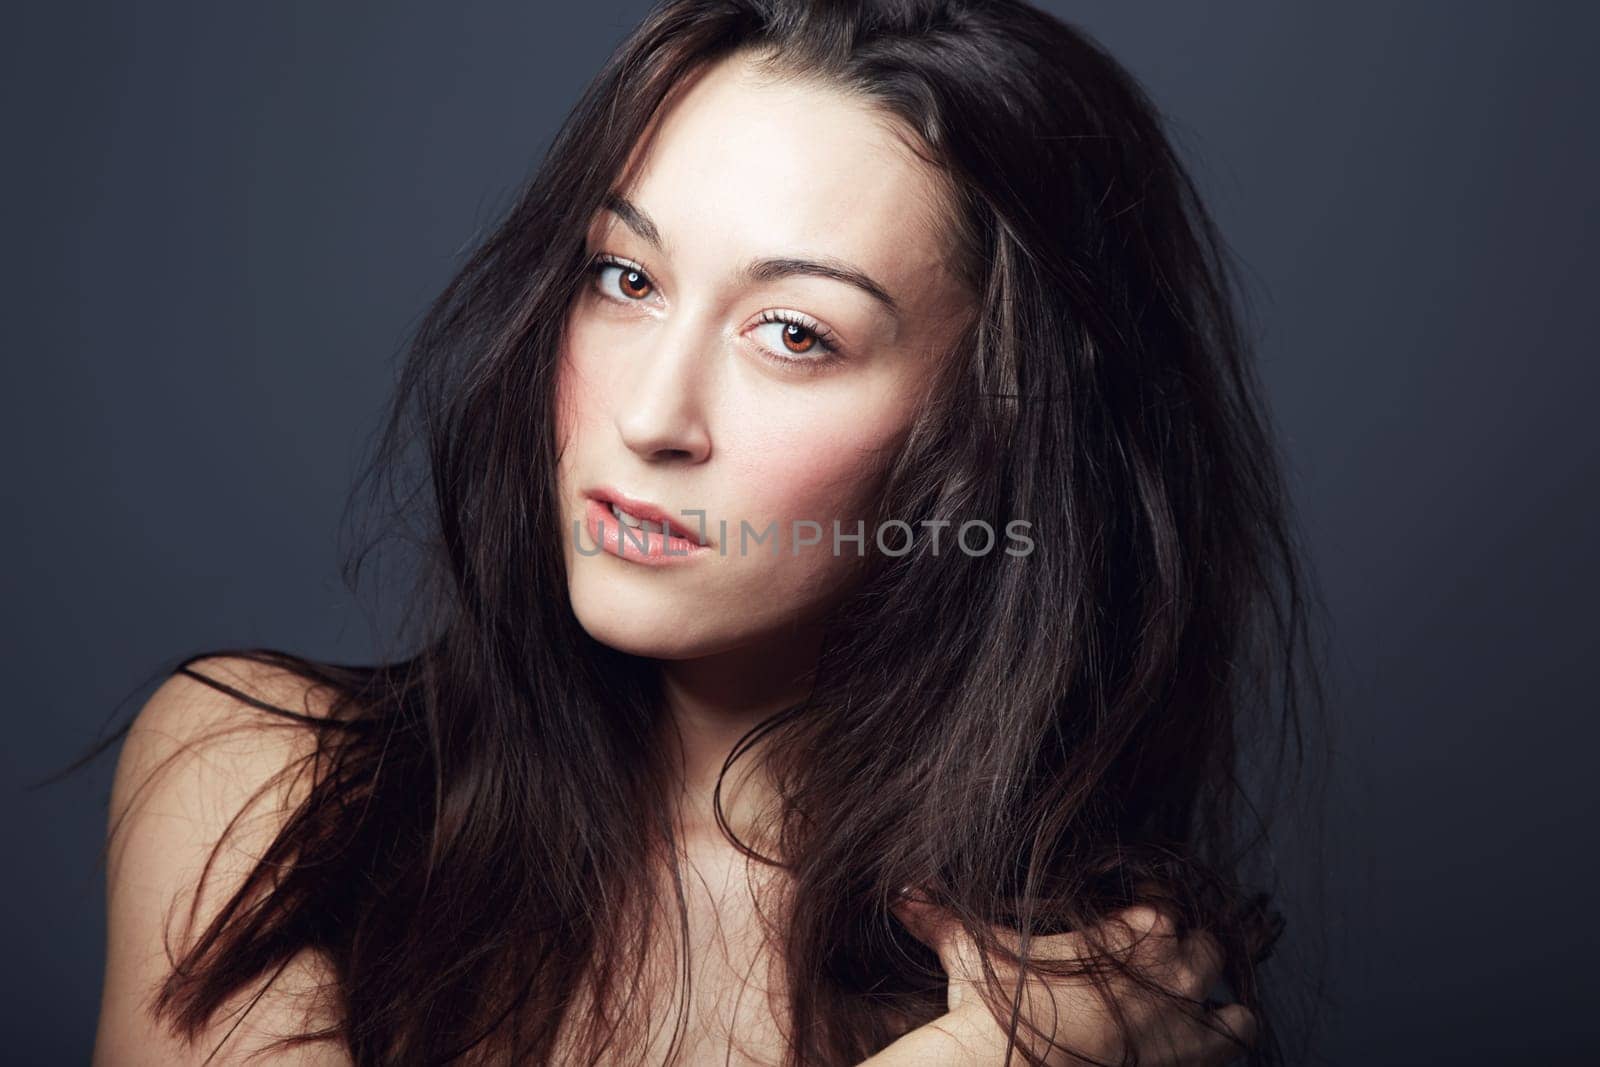 Beauty, cosmetics and face of woman with hair in studio, hairstyle and shine isolated on dark background. Portrait, makeup glow on skin with dermatology, haircare and texture with growth and model.